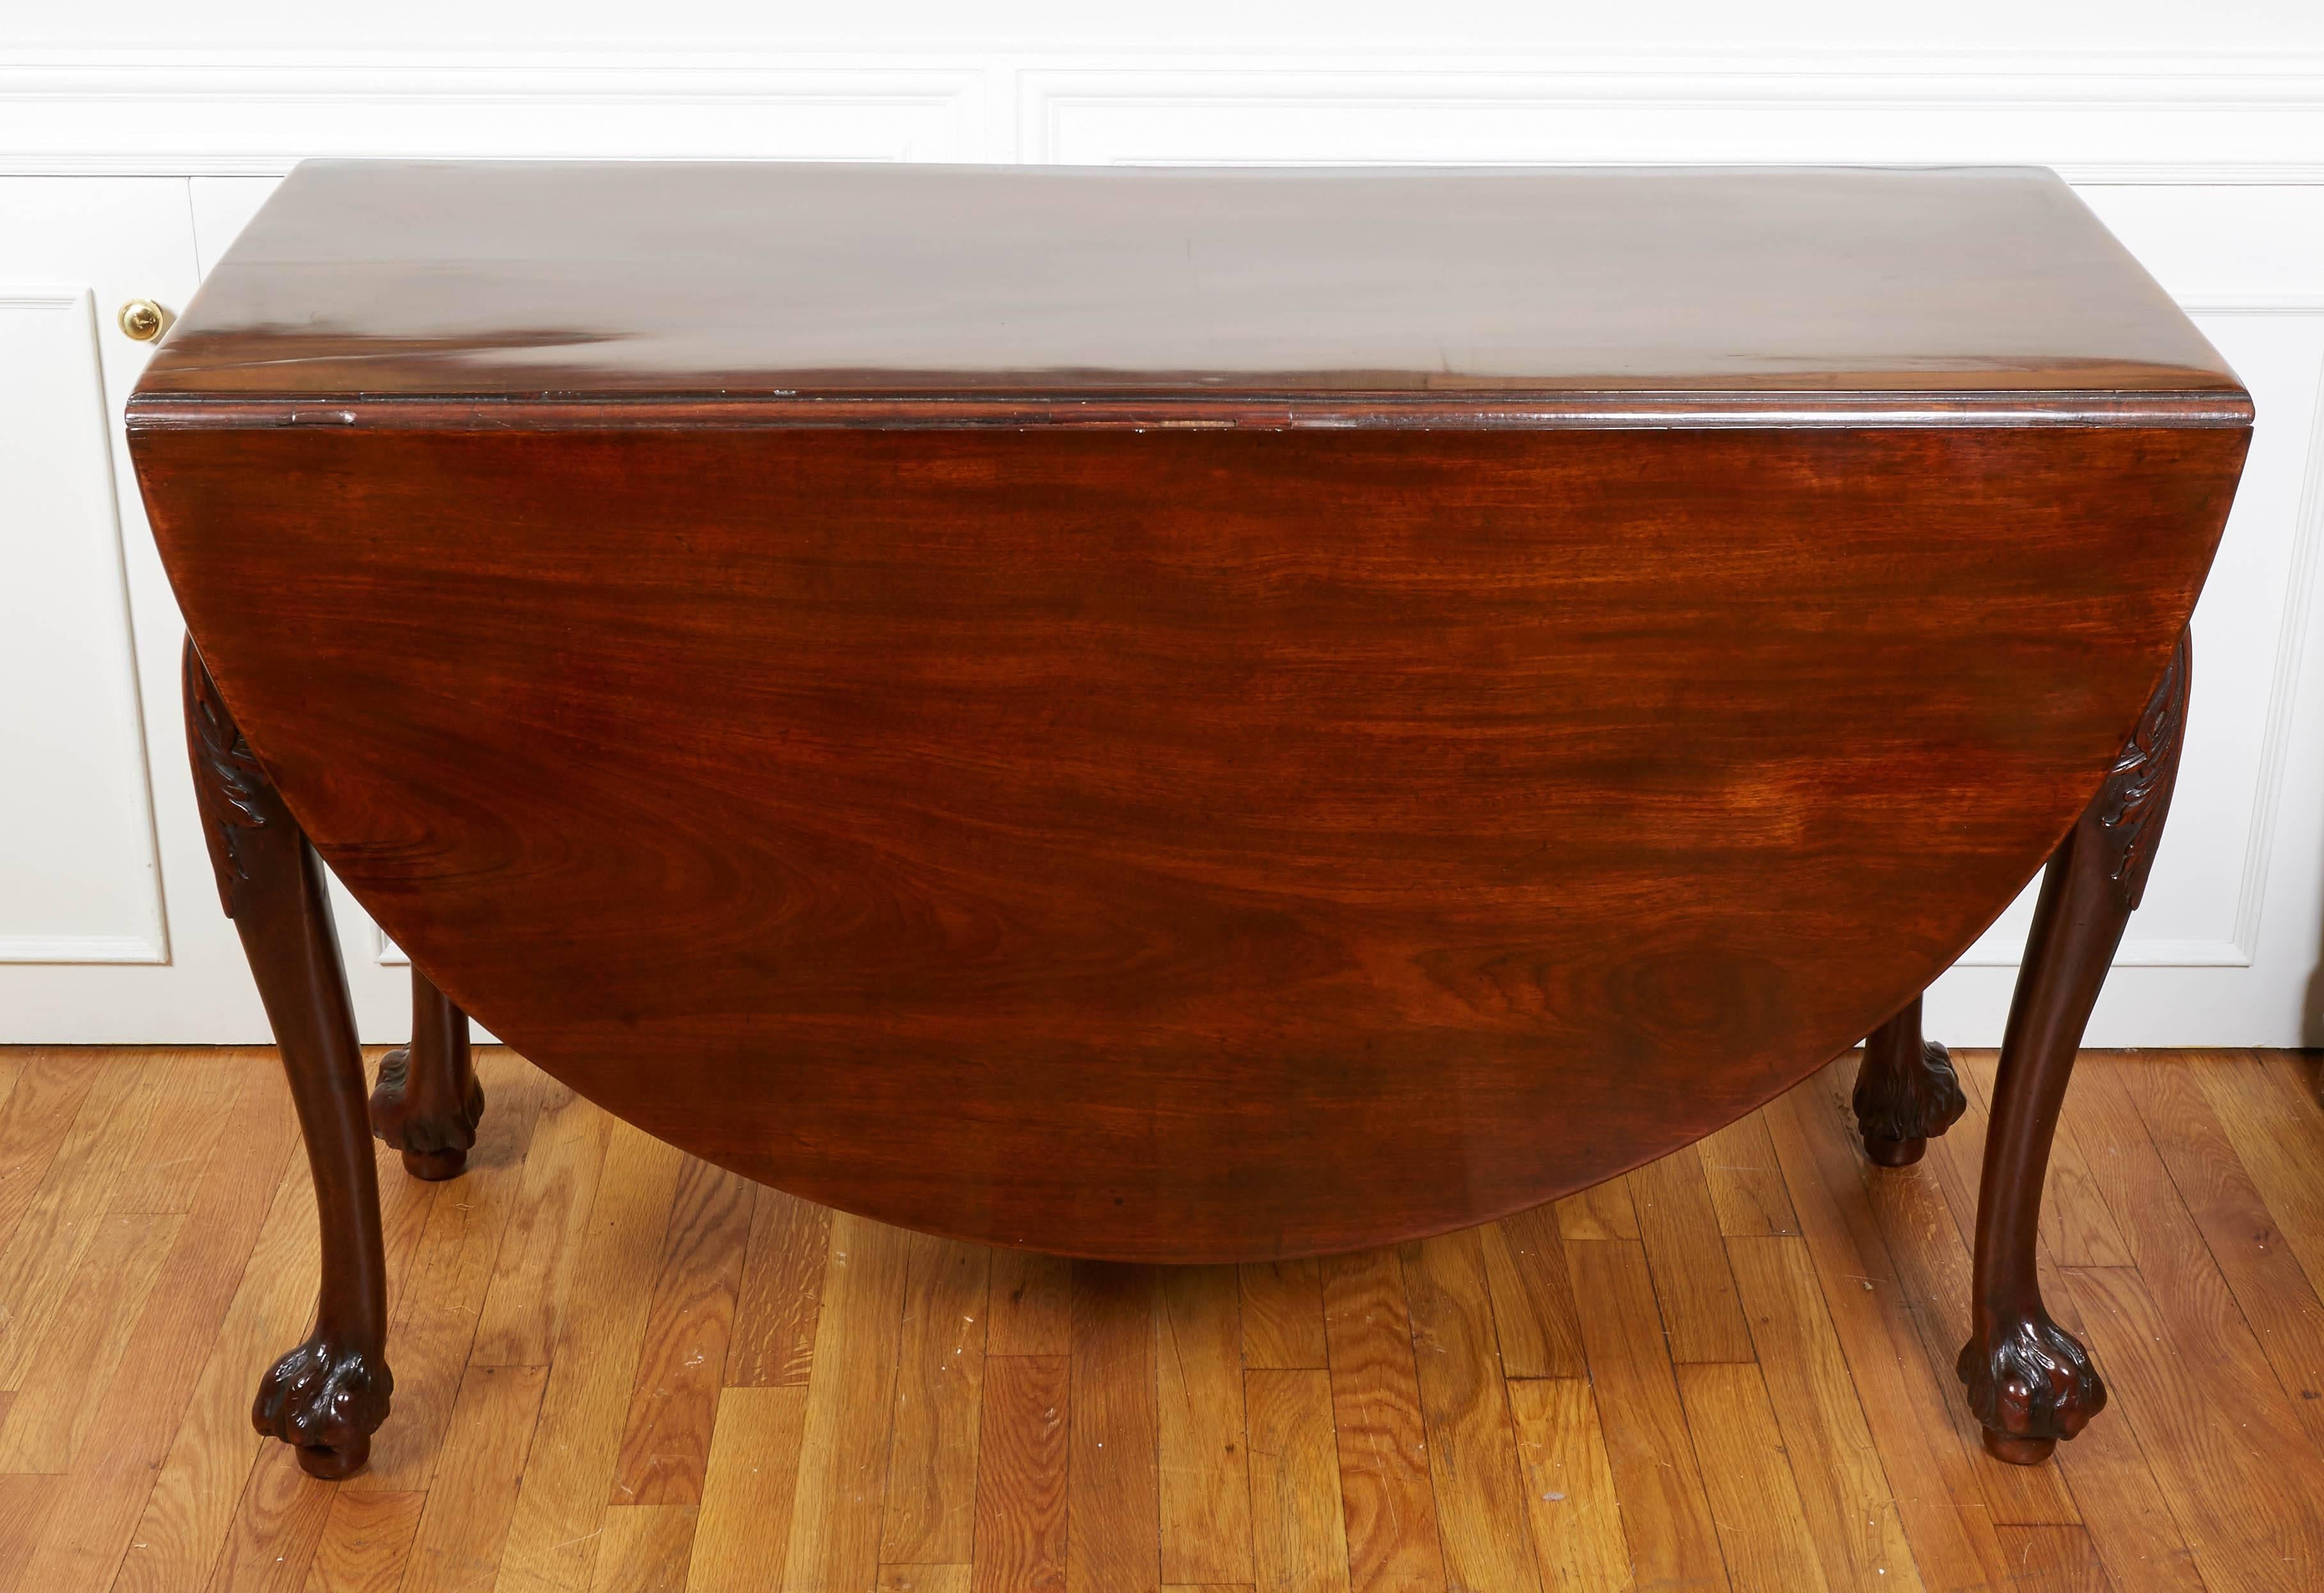 A George II mahogany drop-leaf table, the cabriole legs with bold acanthus carving, terminating in a hairy paw foot, circa 1760.